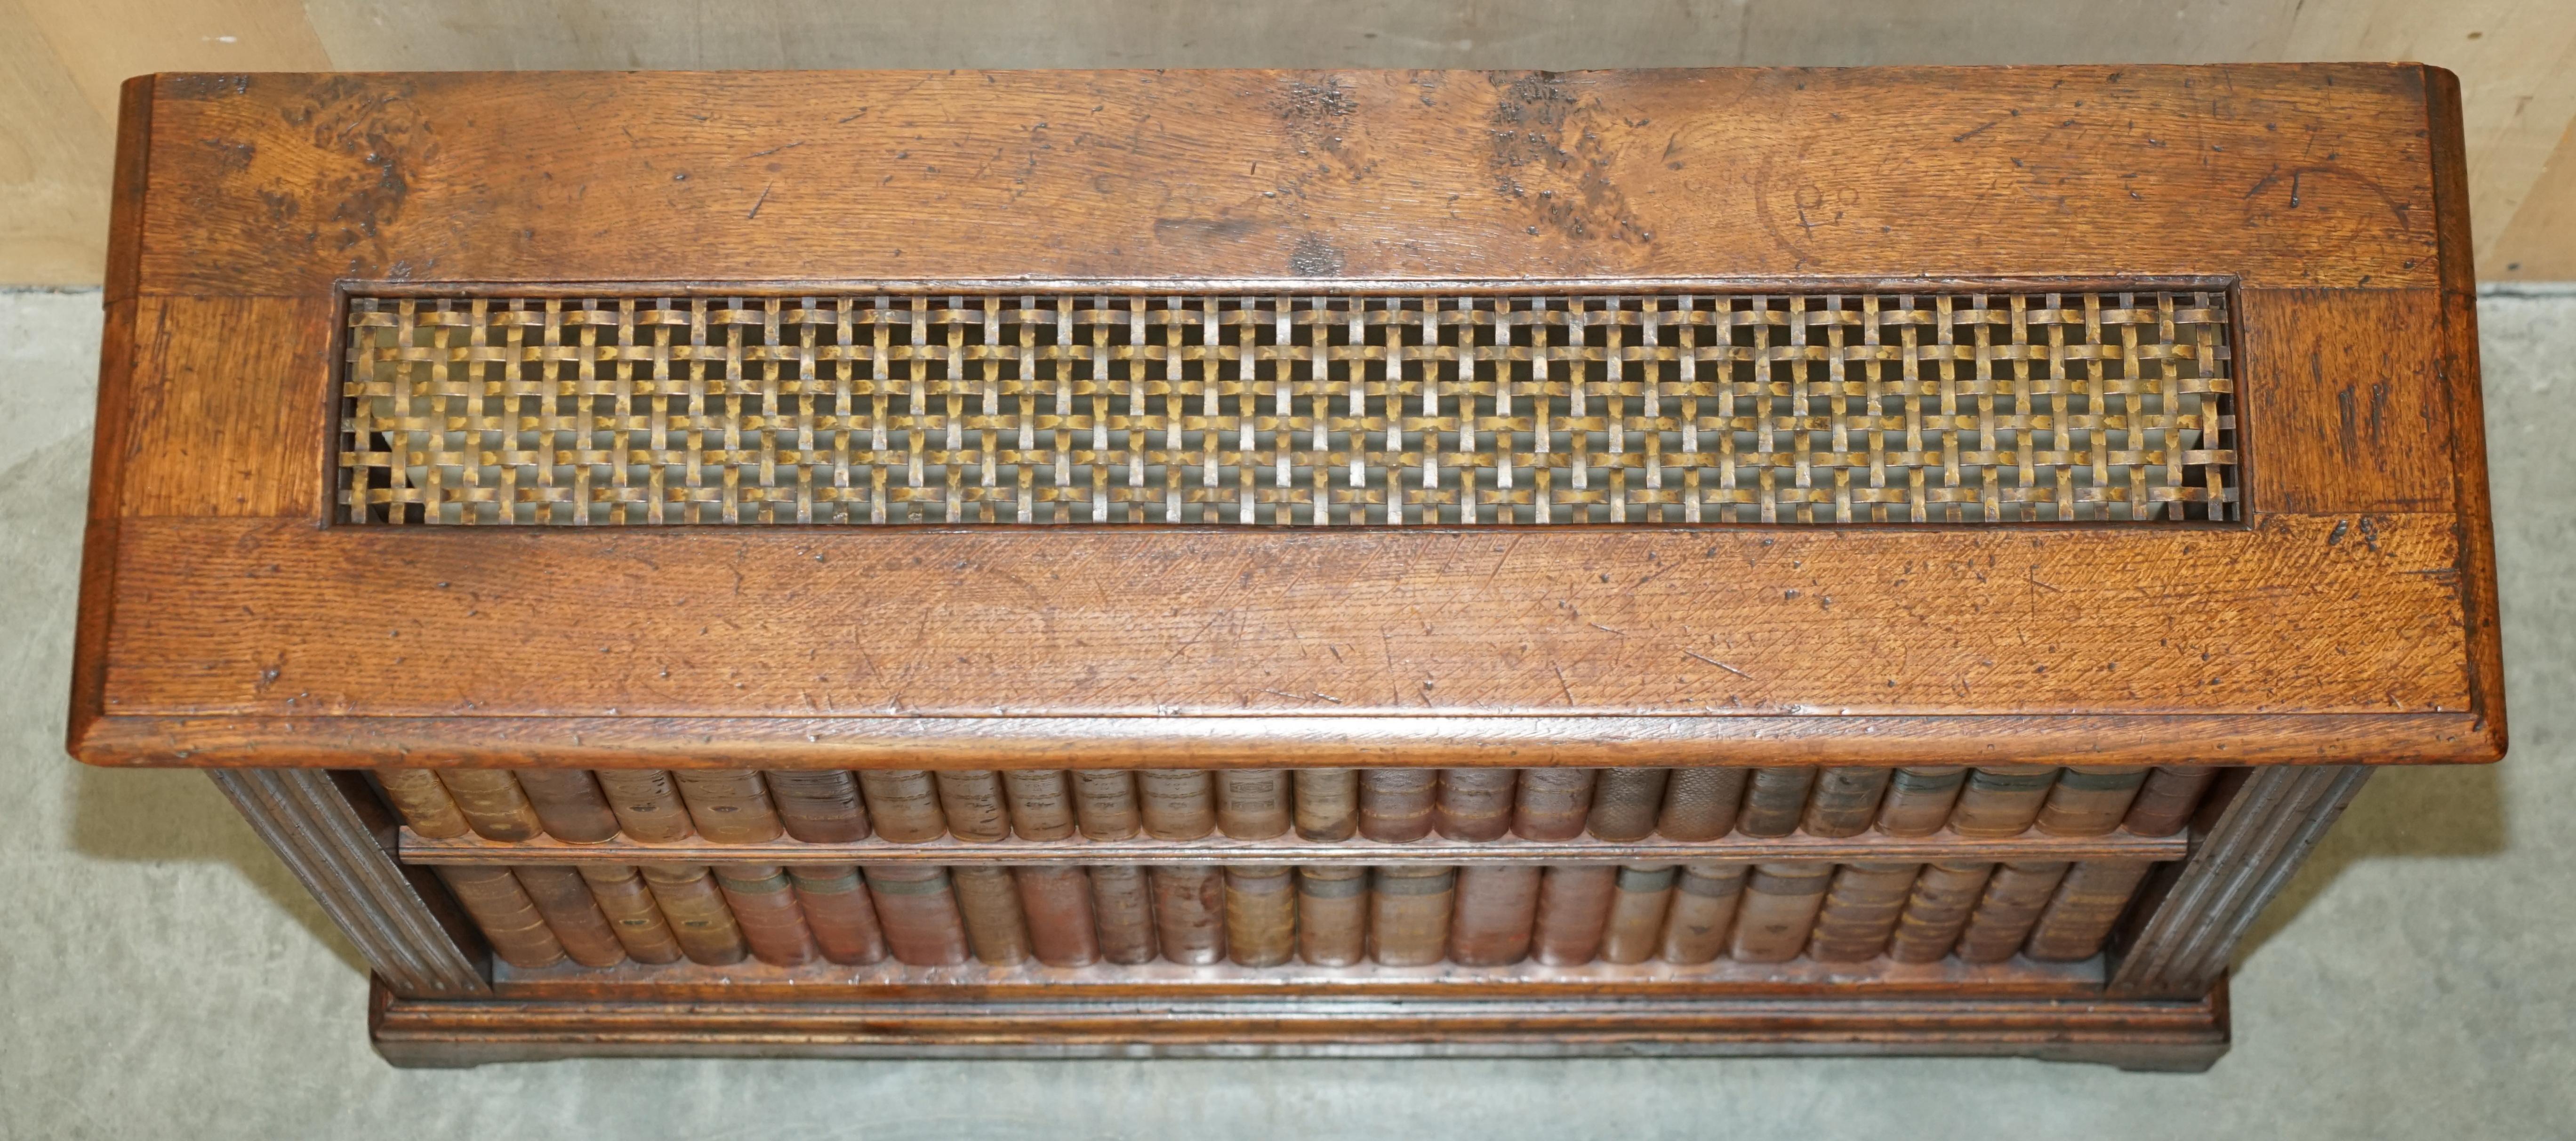 ViNTAGE FAUX BOOK FRONT RADIATOR COVER CONSOLE TABLE, SUPER DECORATIVE AND RARE 8